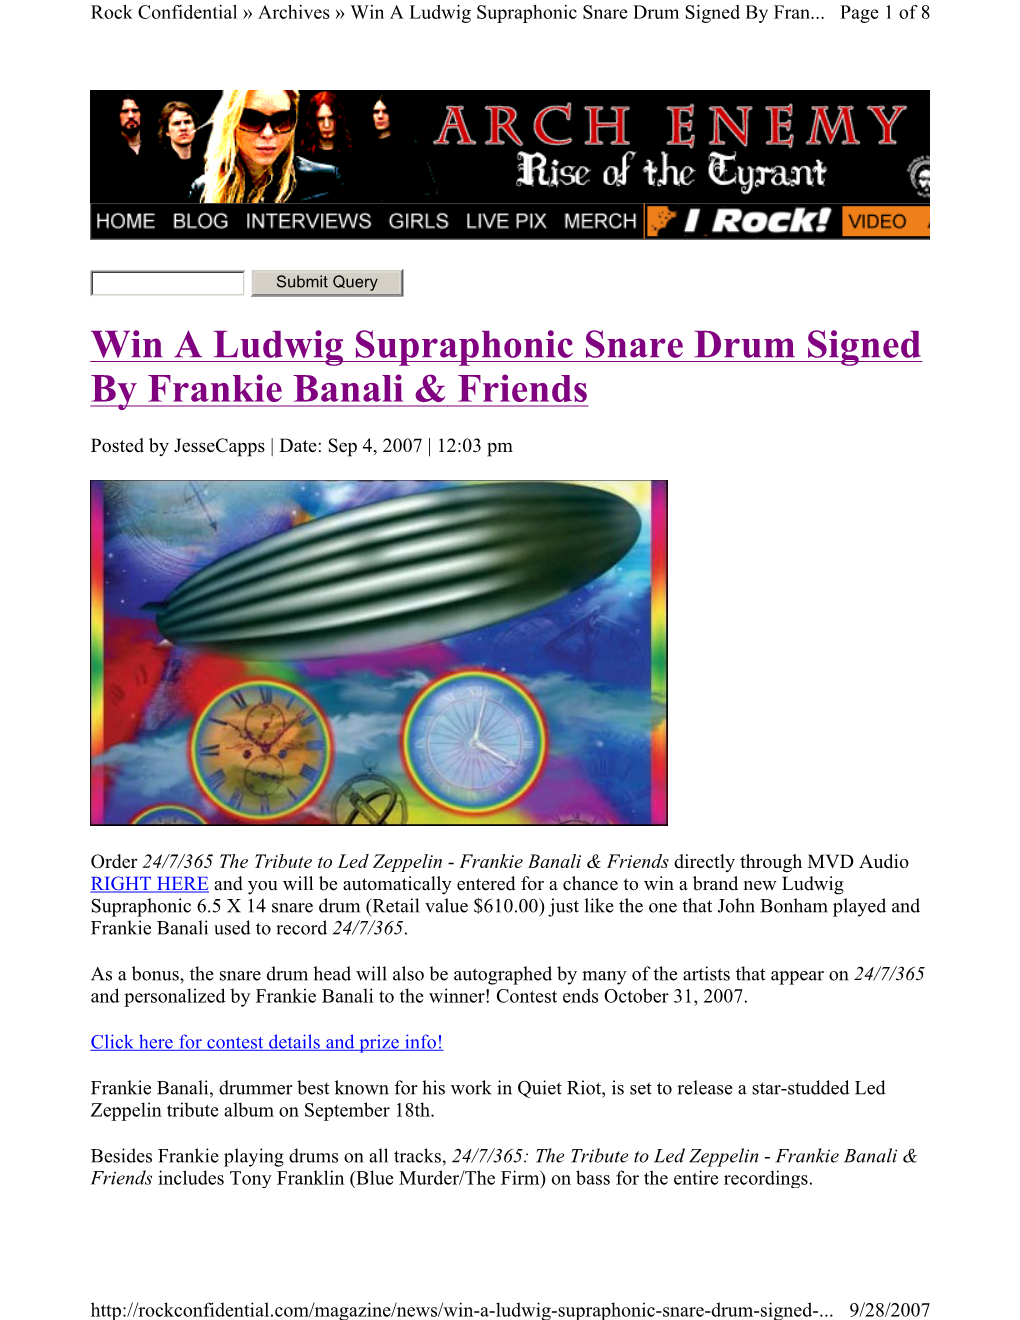 Win a Ludwig Supraphonic Snare Drum Signed by Frankie Banali & Friends